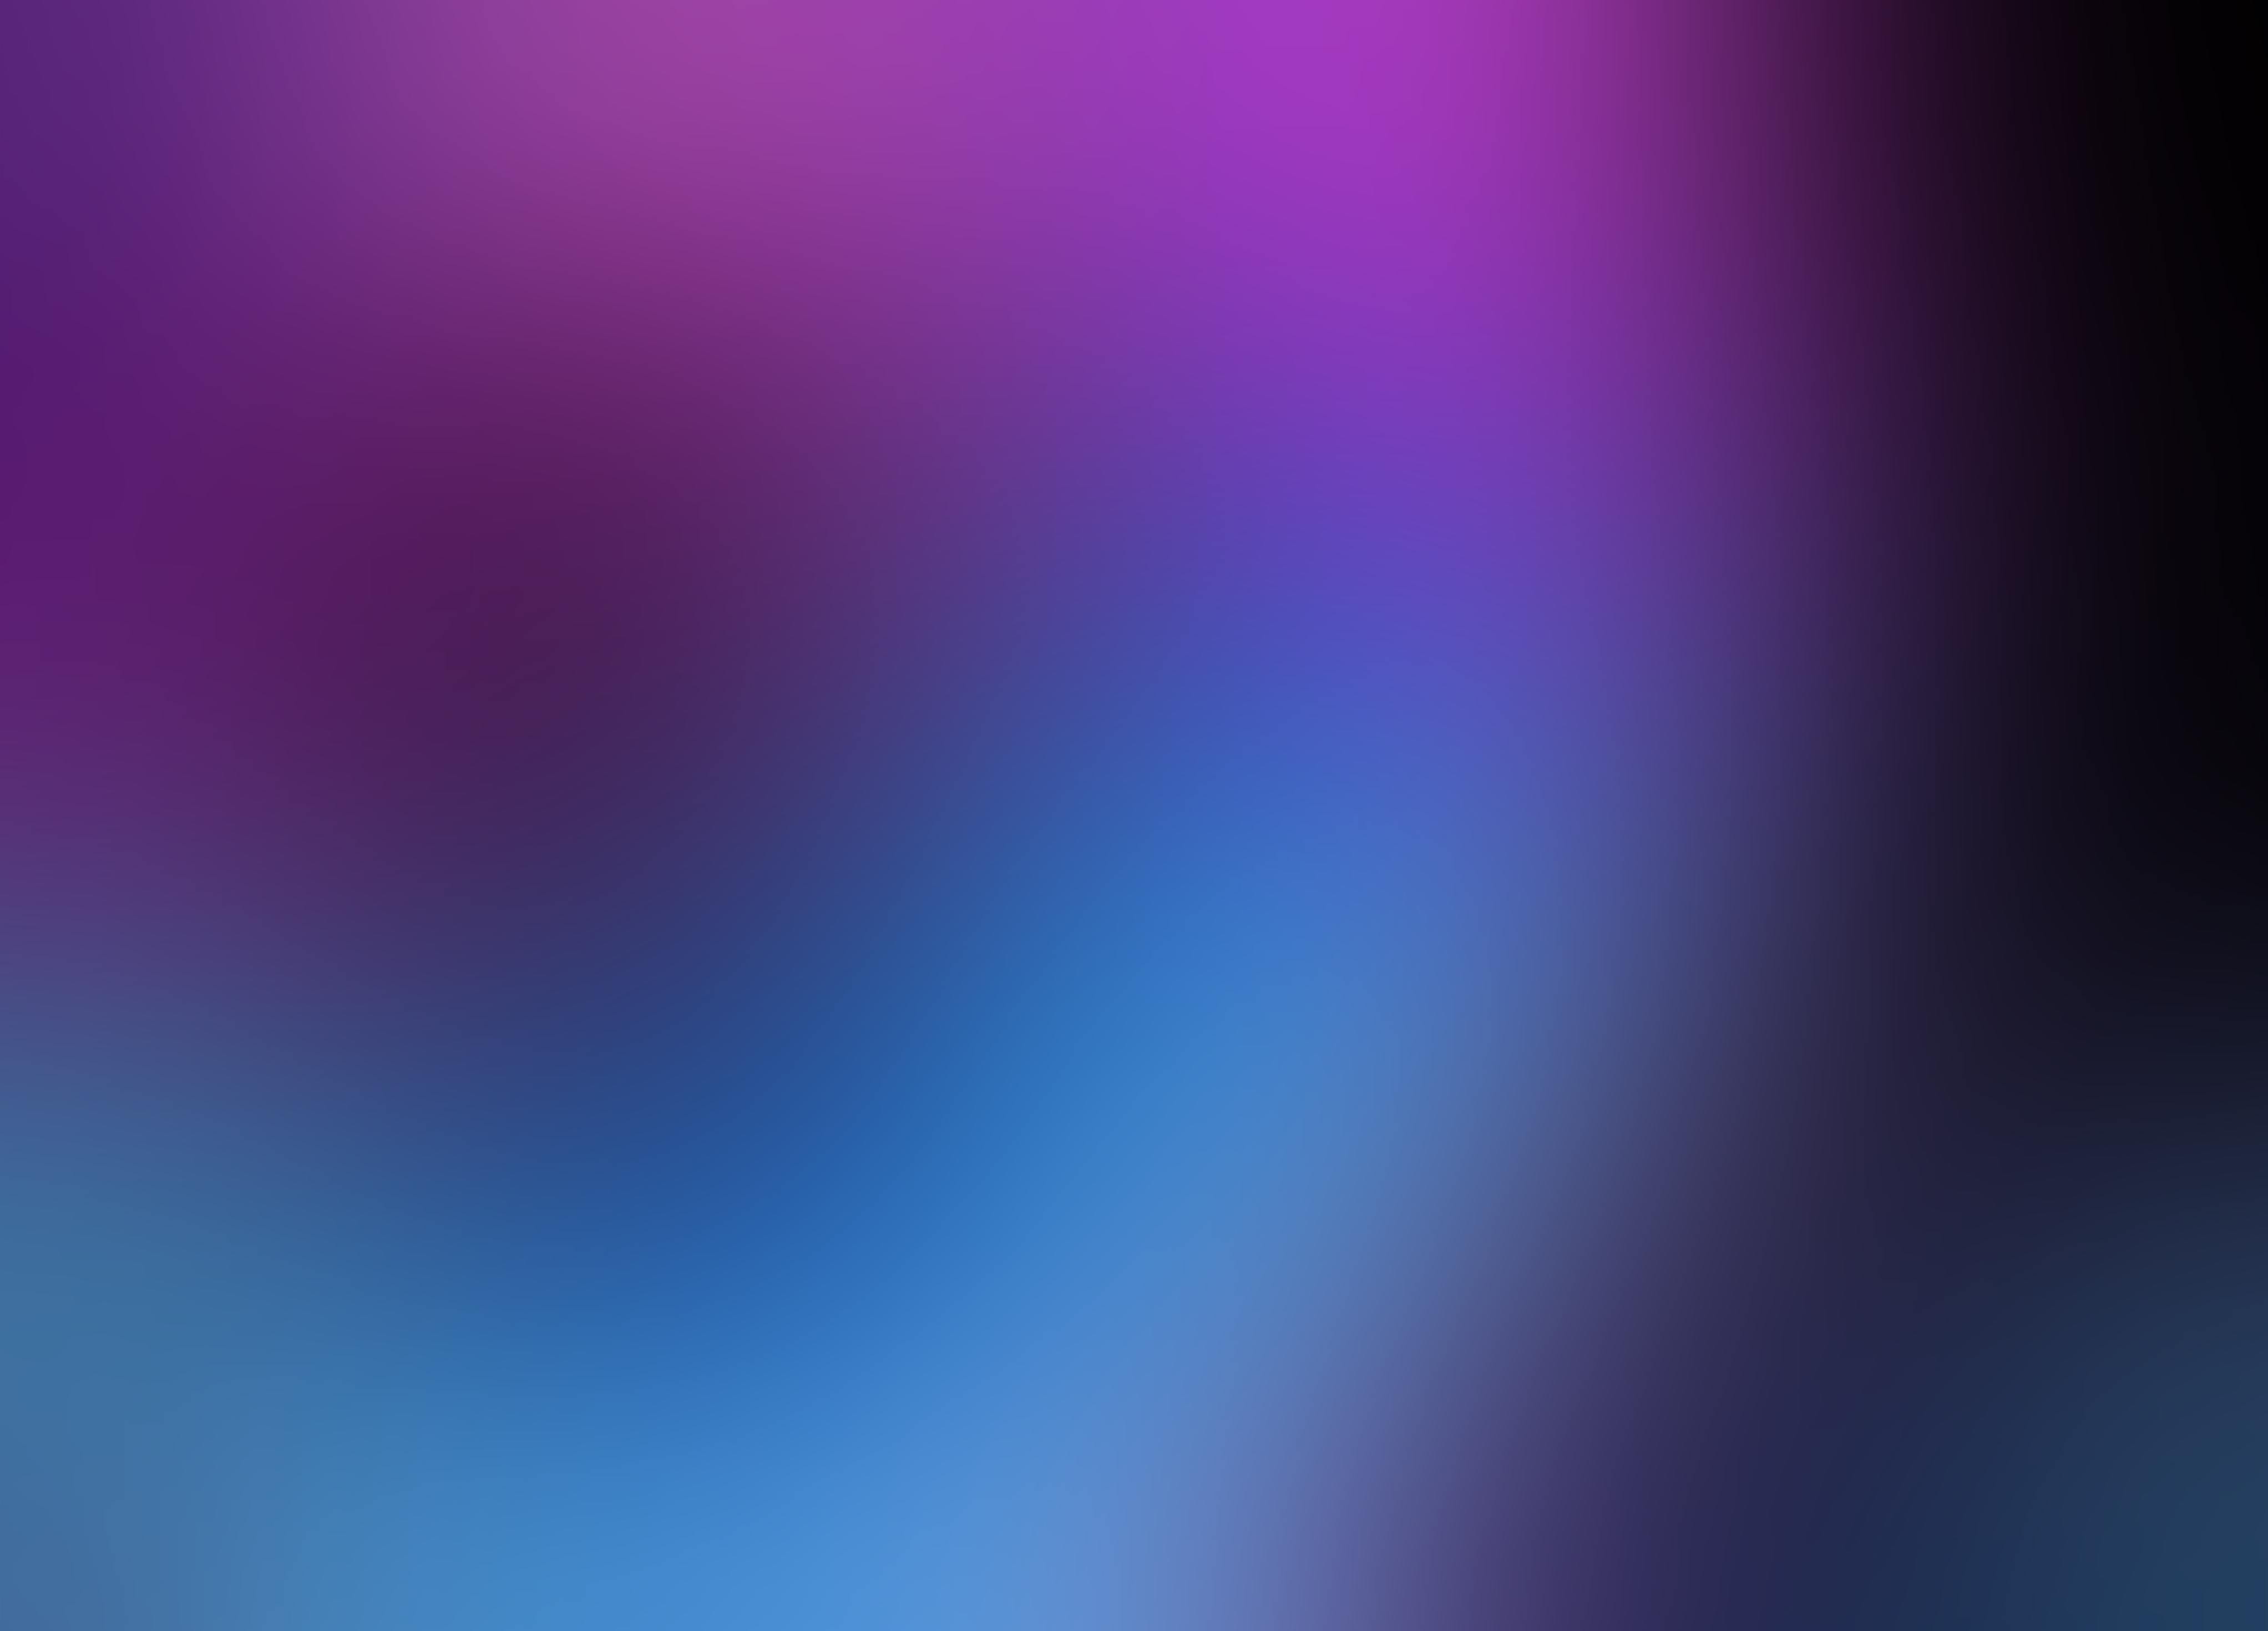 Gradient Blur 9 Photos & Videos Collected by Jeel Patel